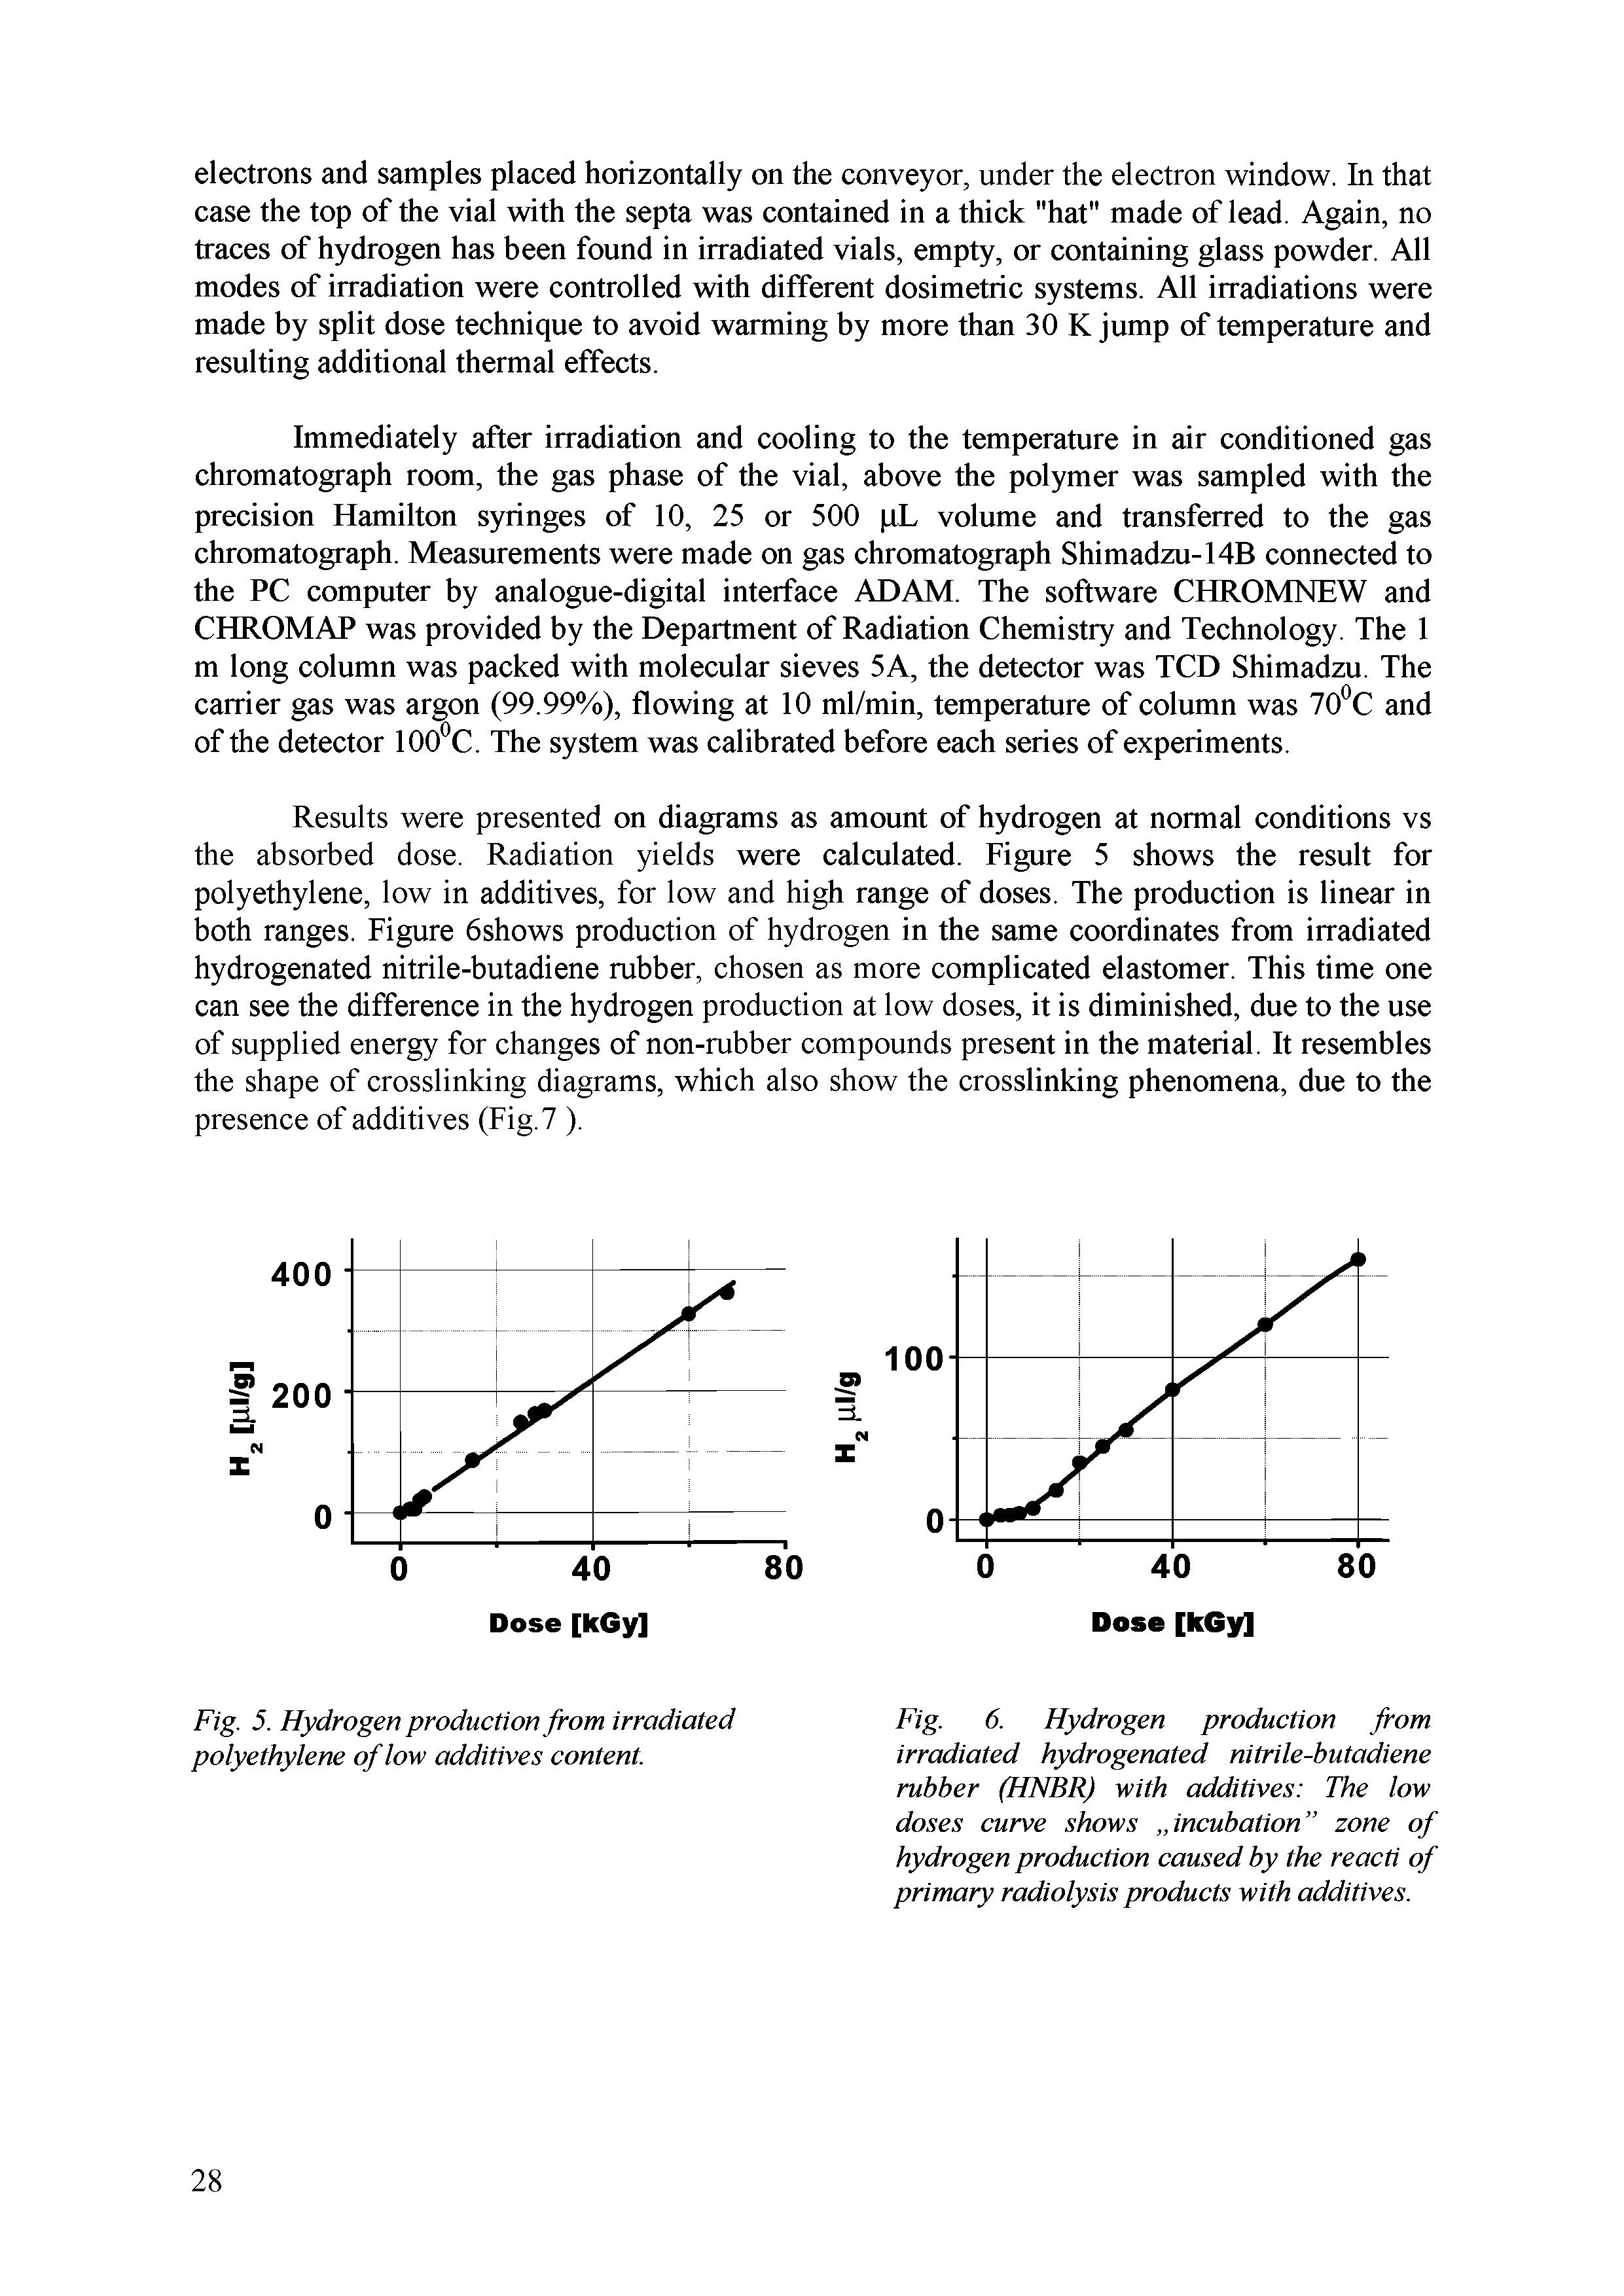 Fig. 6. Hydrogen production from irradiated hydrogenated nitrile-butadiene rubber (HNBR) with additives The low doses curve shows incubation zone of hydrogen production caused by the reach of primary radiolysis products with additives.